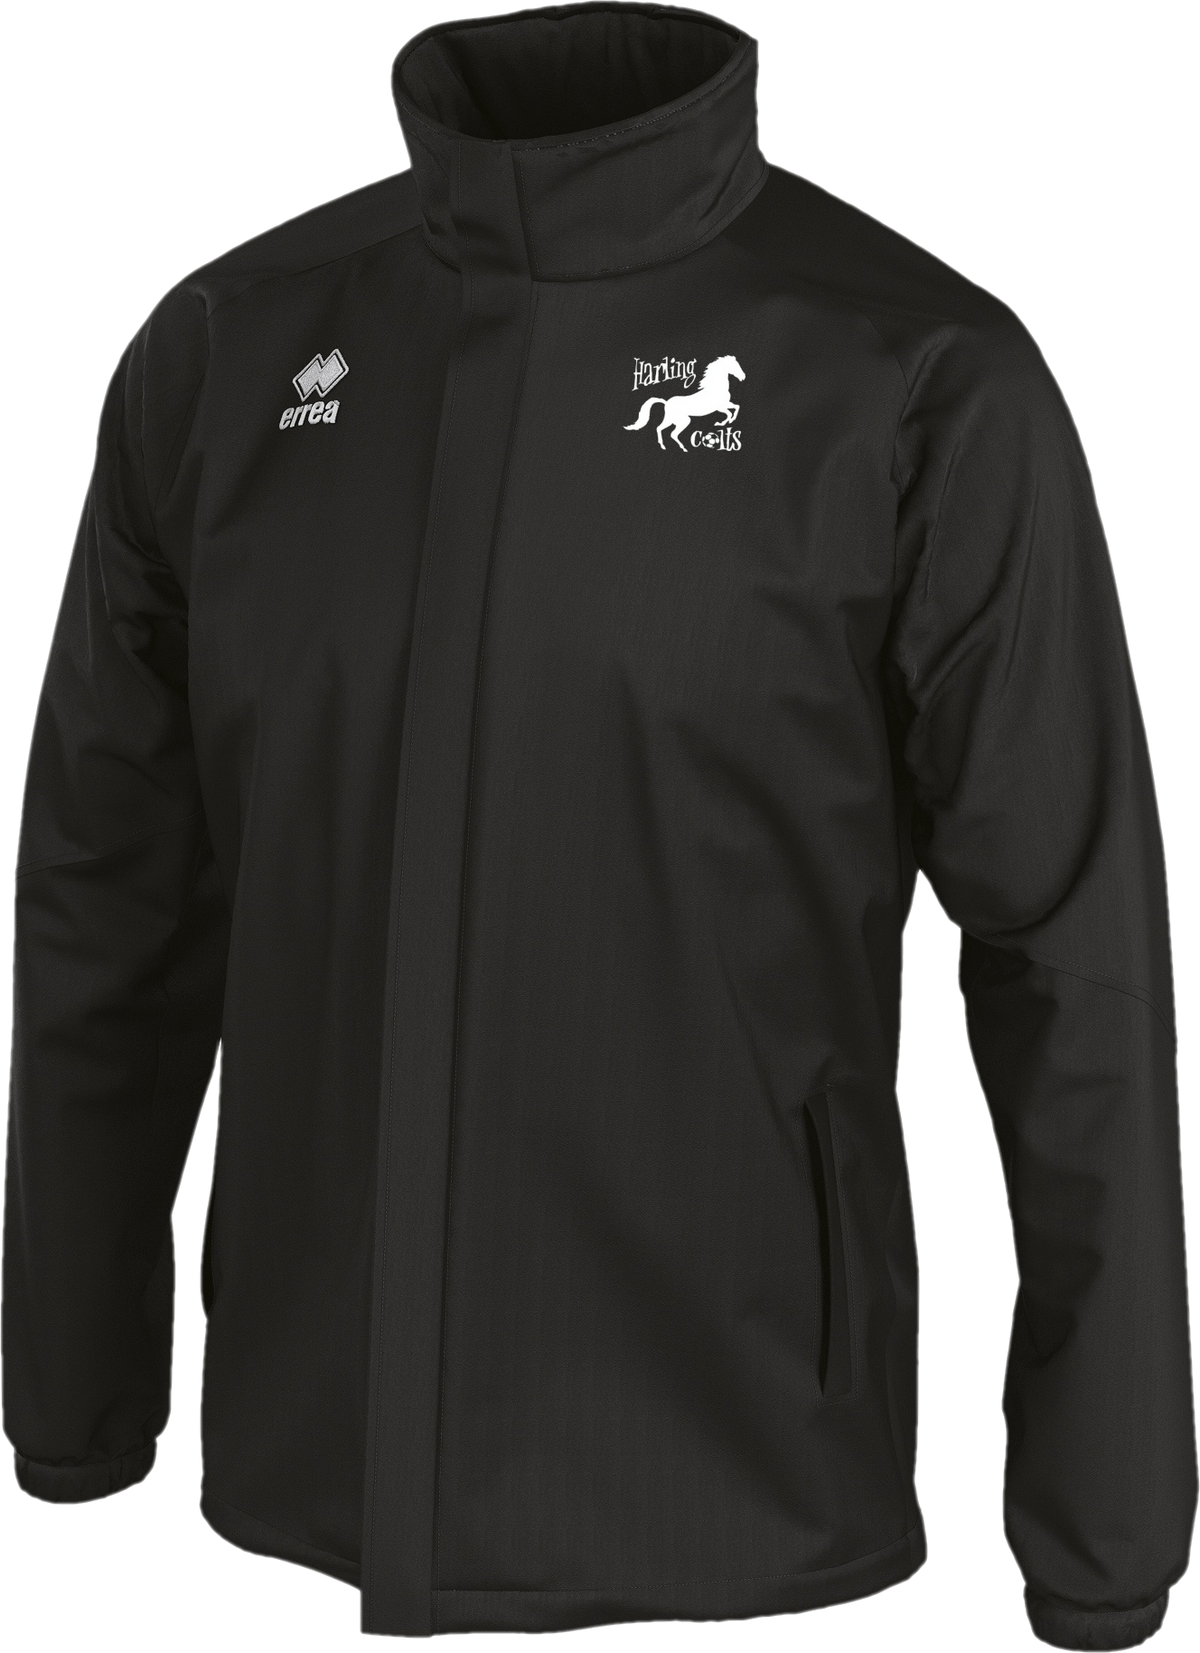 Harling Colts FC Syun Jacket in Adult